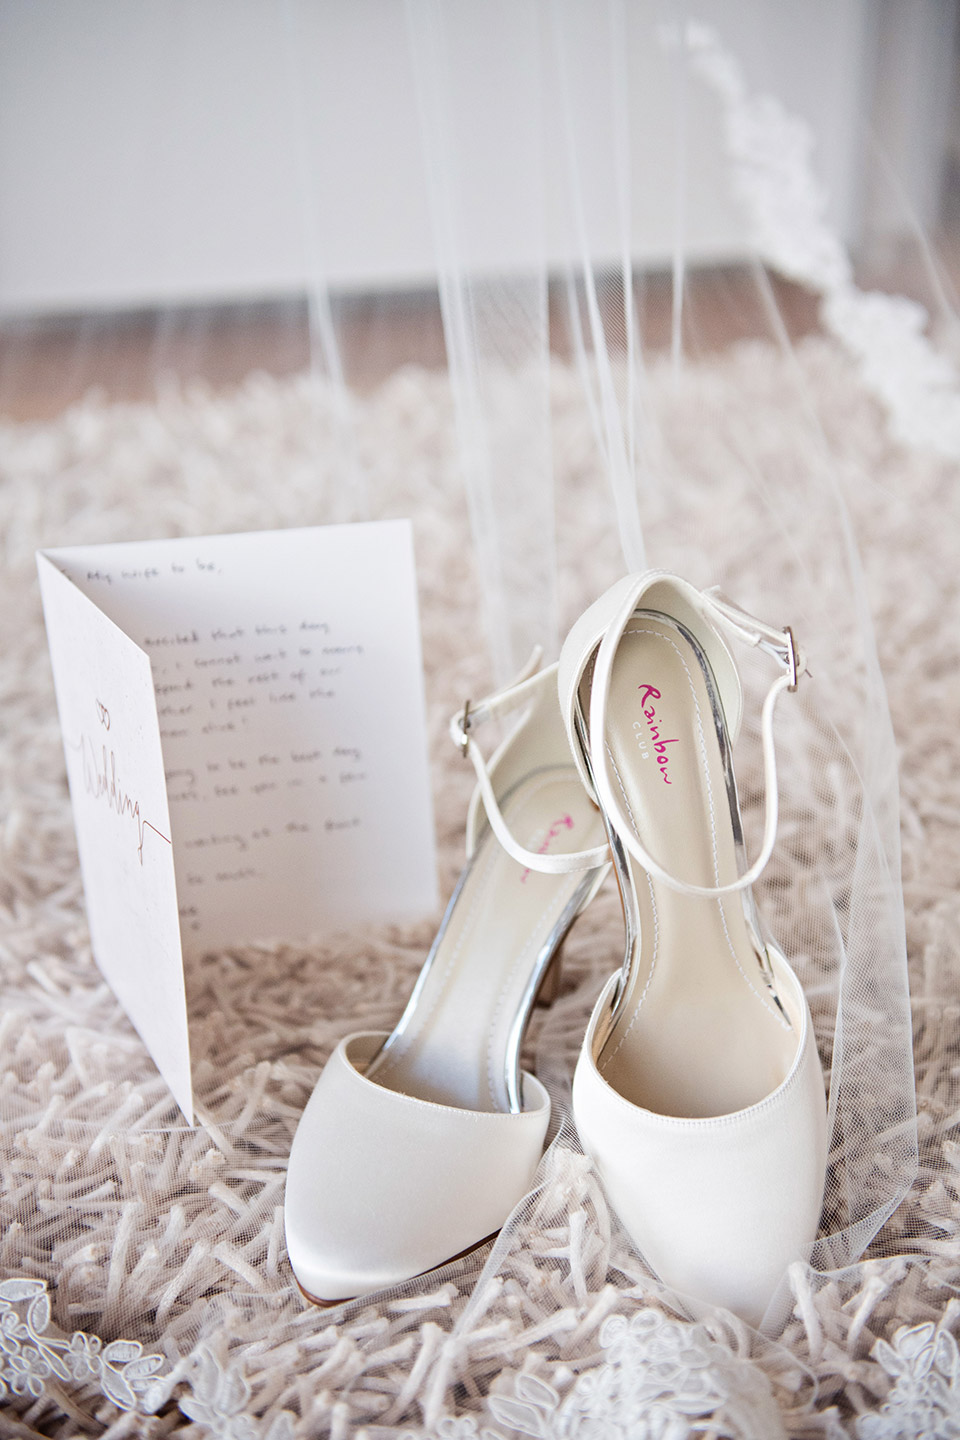 wedding shoes under vail with a wedding card from husband to be